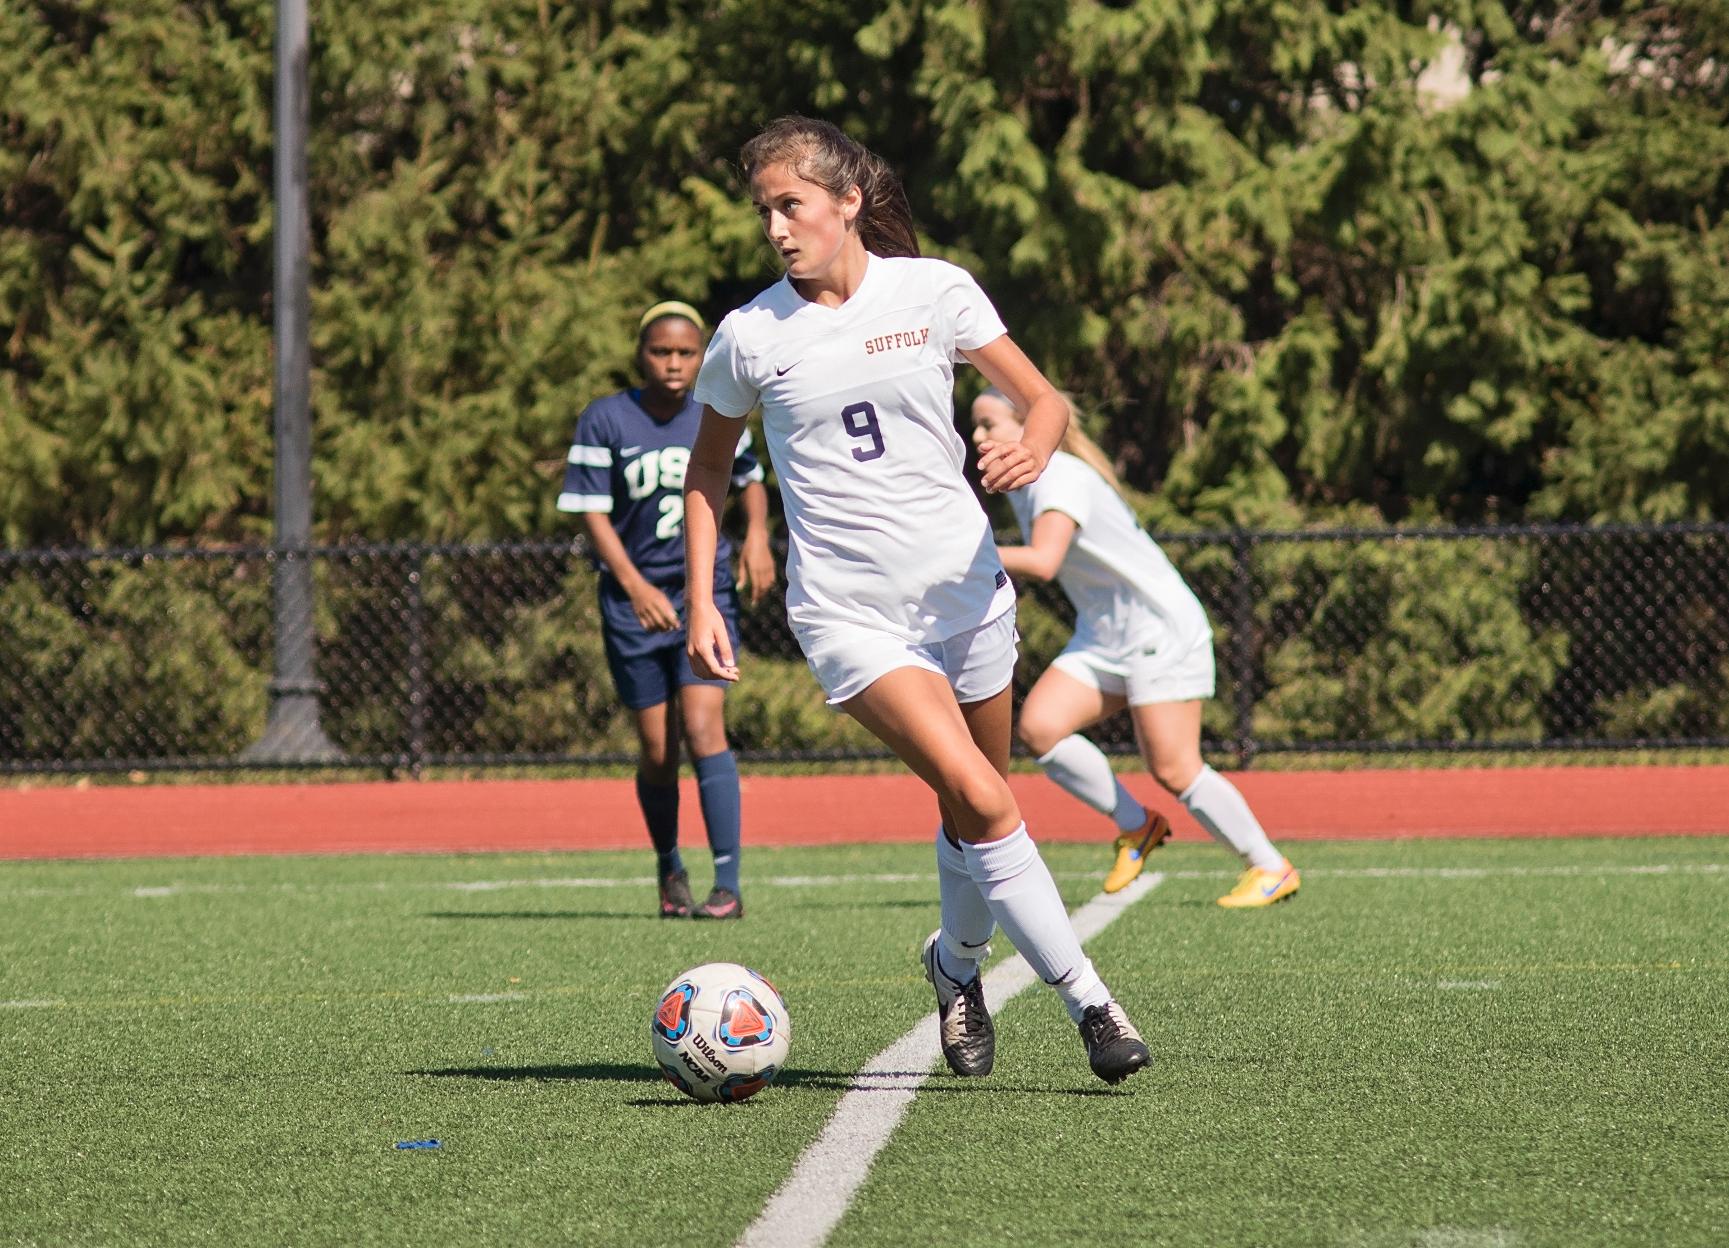 Whipple Sends Women’s Soccer Past Curry in 1-0 Shutout